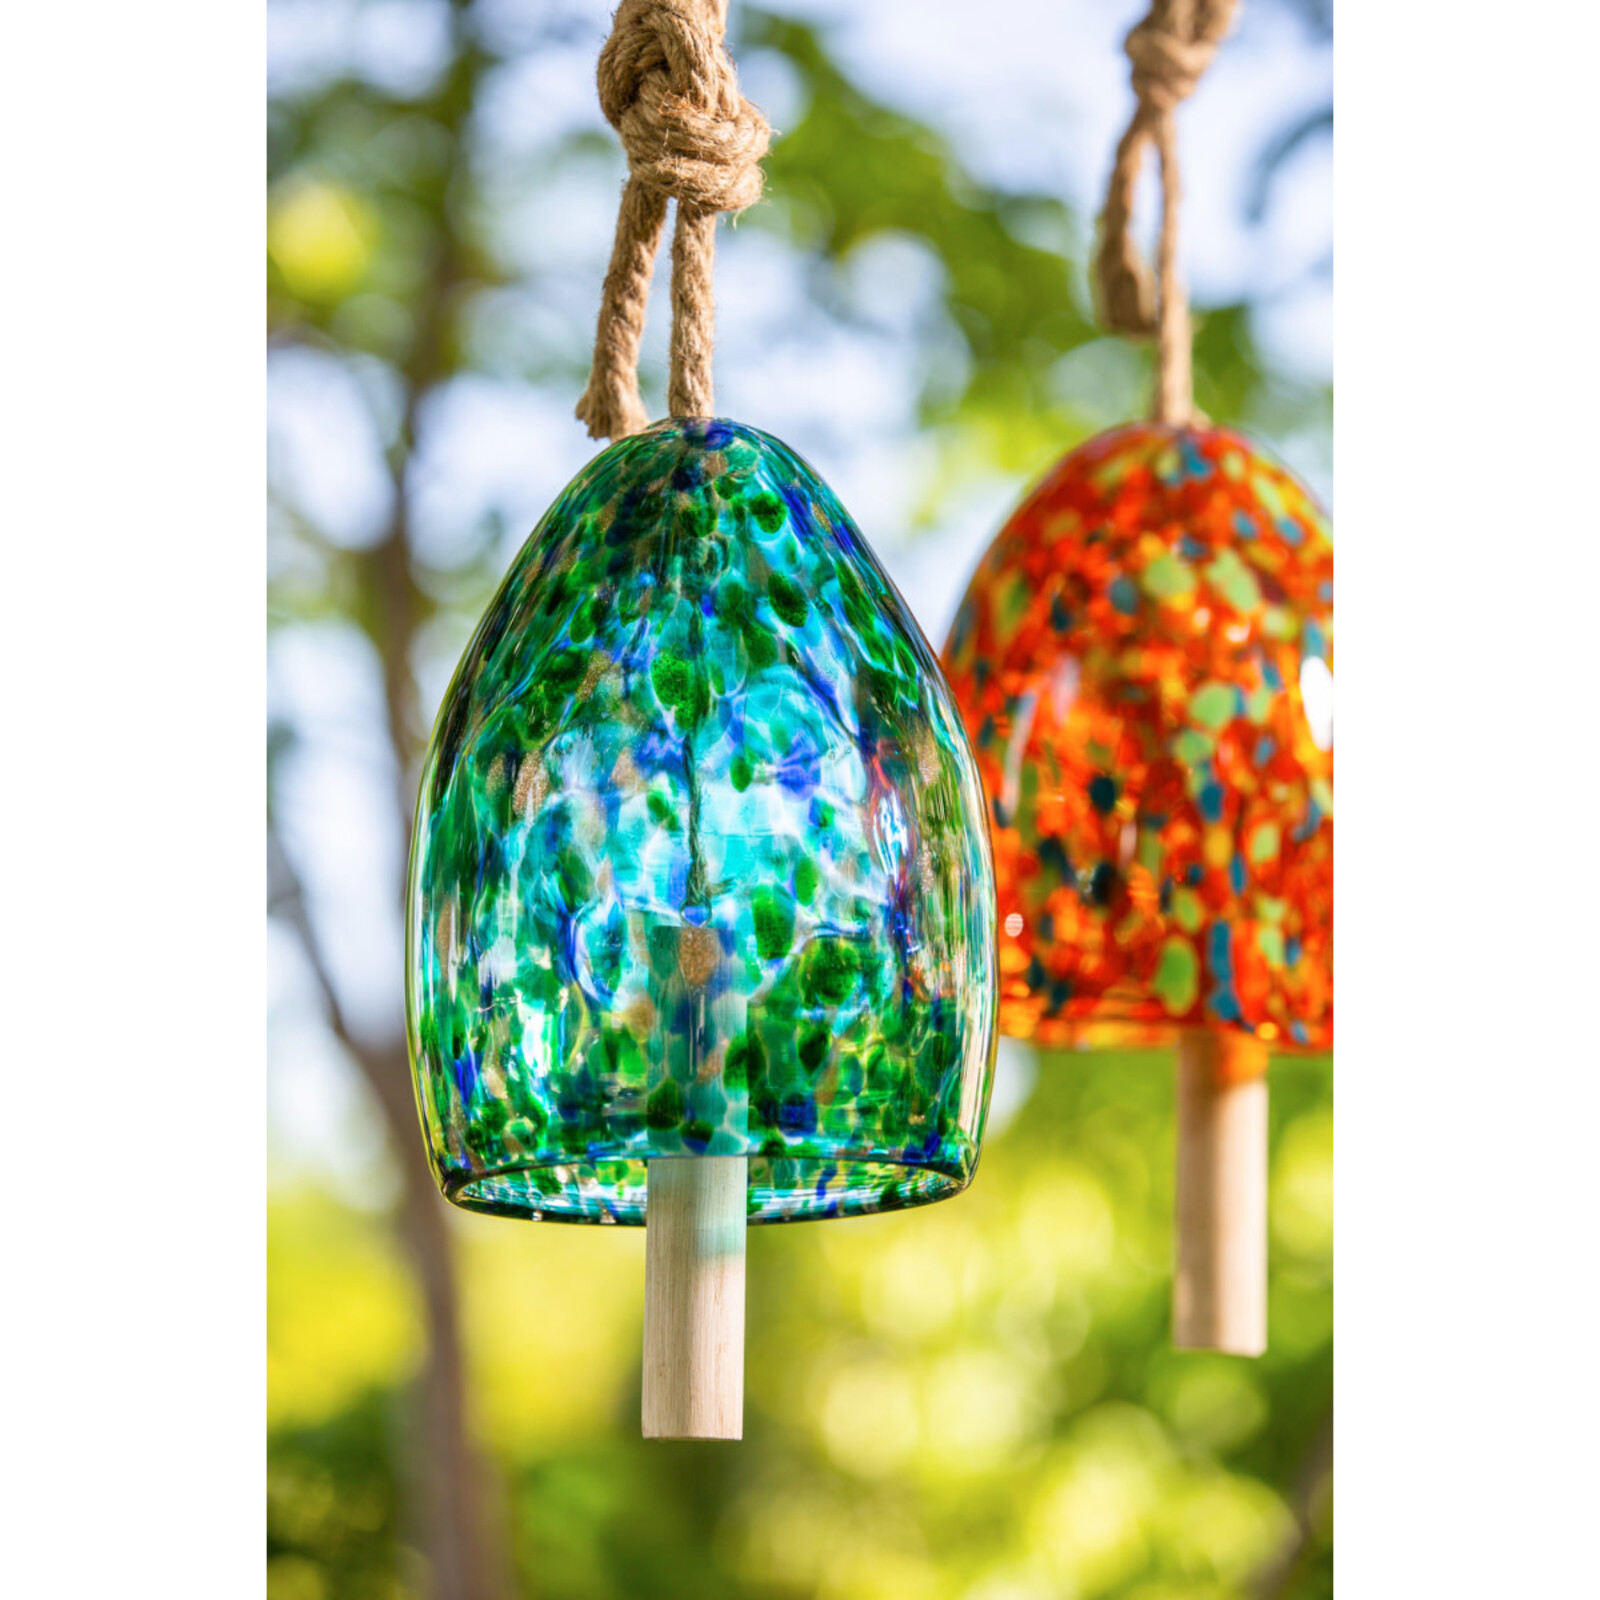 Evergreen Enterprises Art Glass Speckle Turquoise Bell Chime  2WC1823 loading=